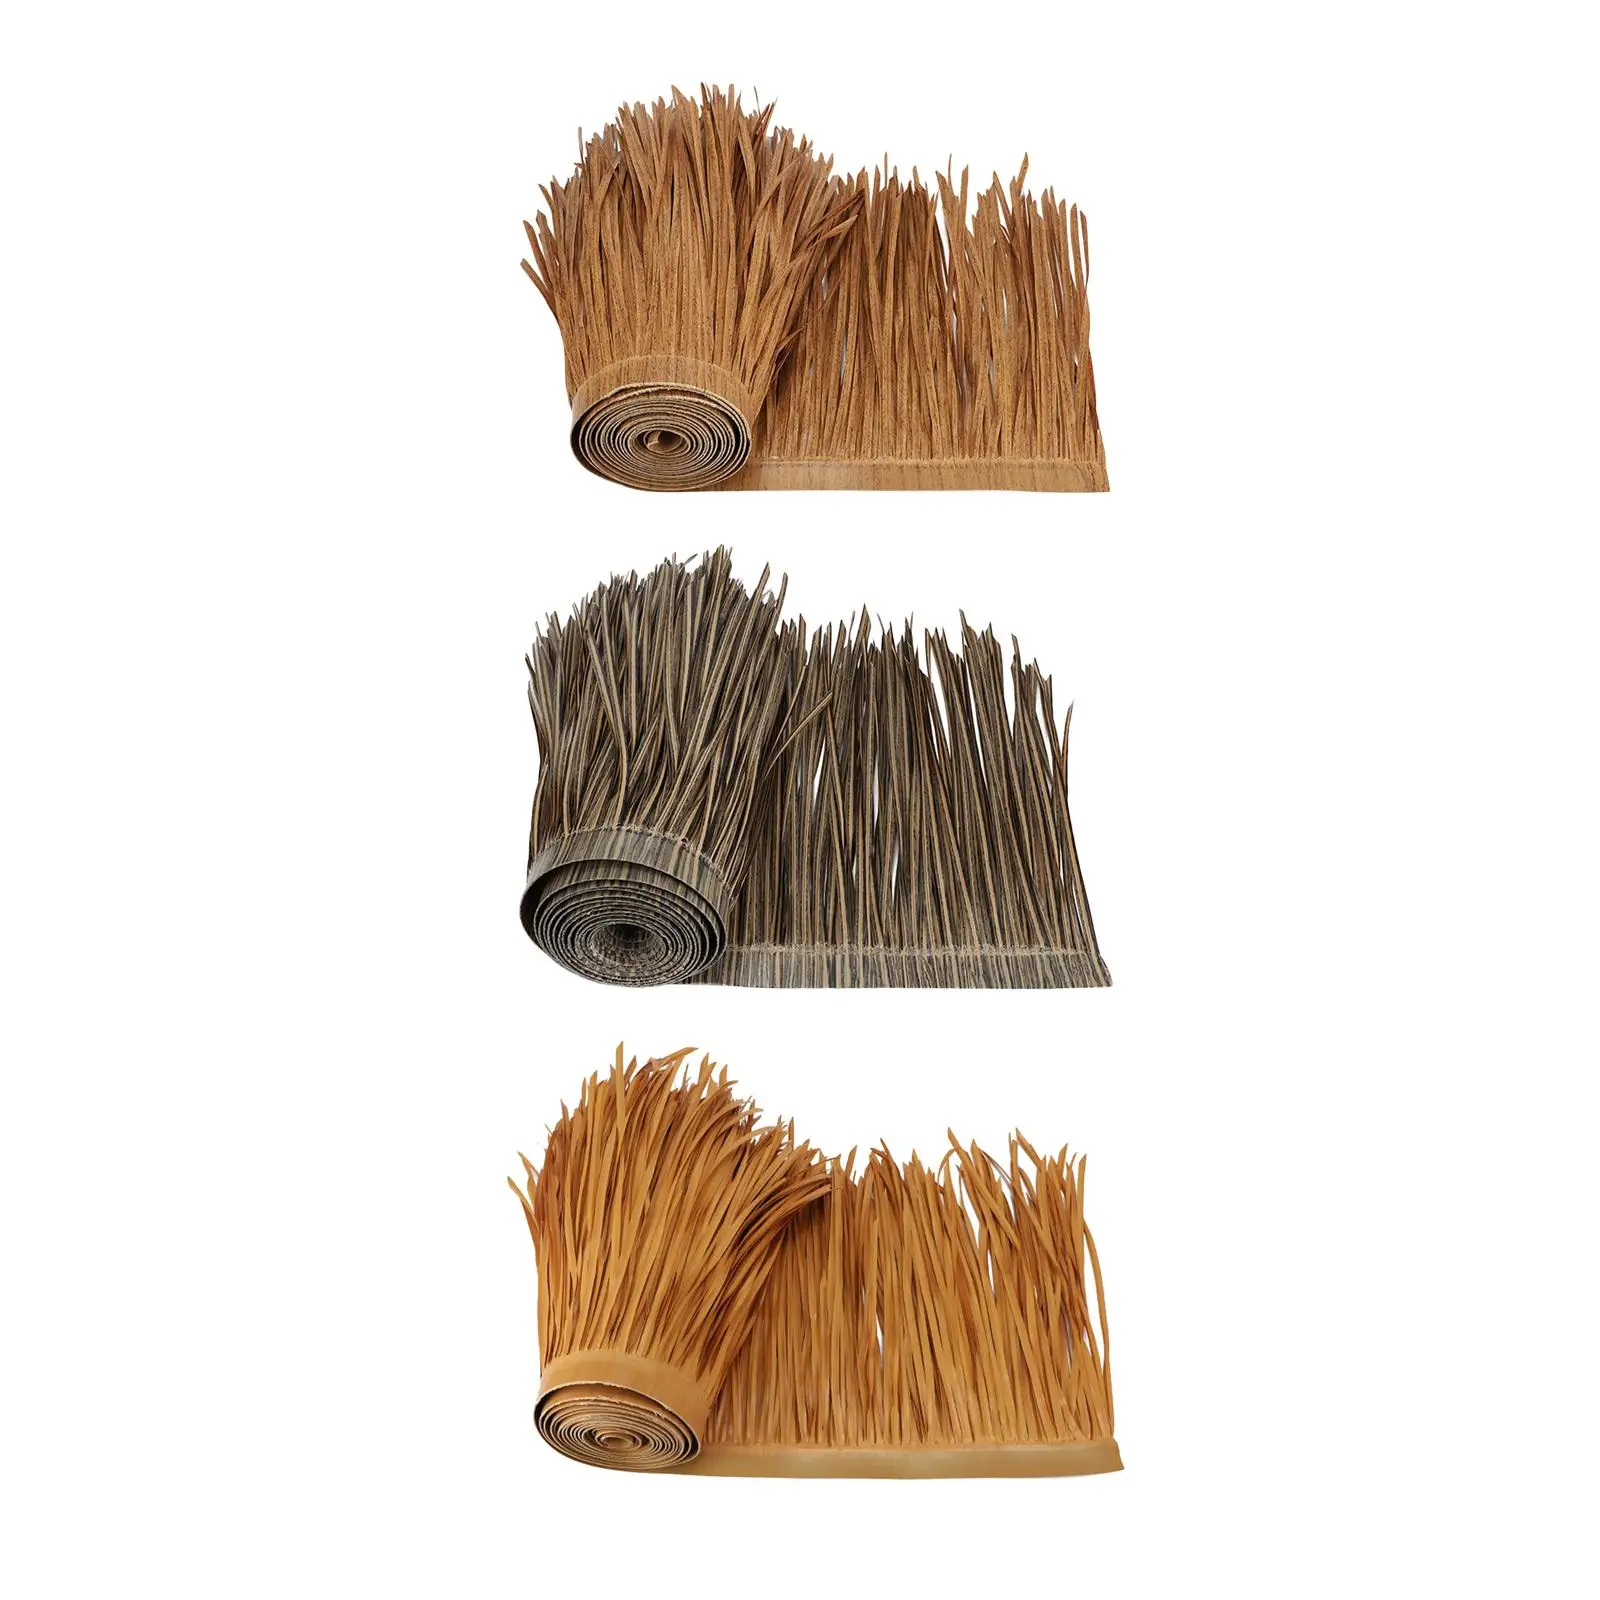 Straw Roof Thatch Simulation Artificial Palm Thatch for Outdoor Bar Patio